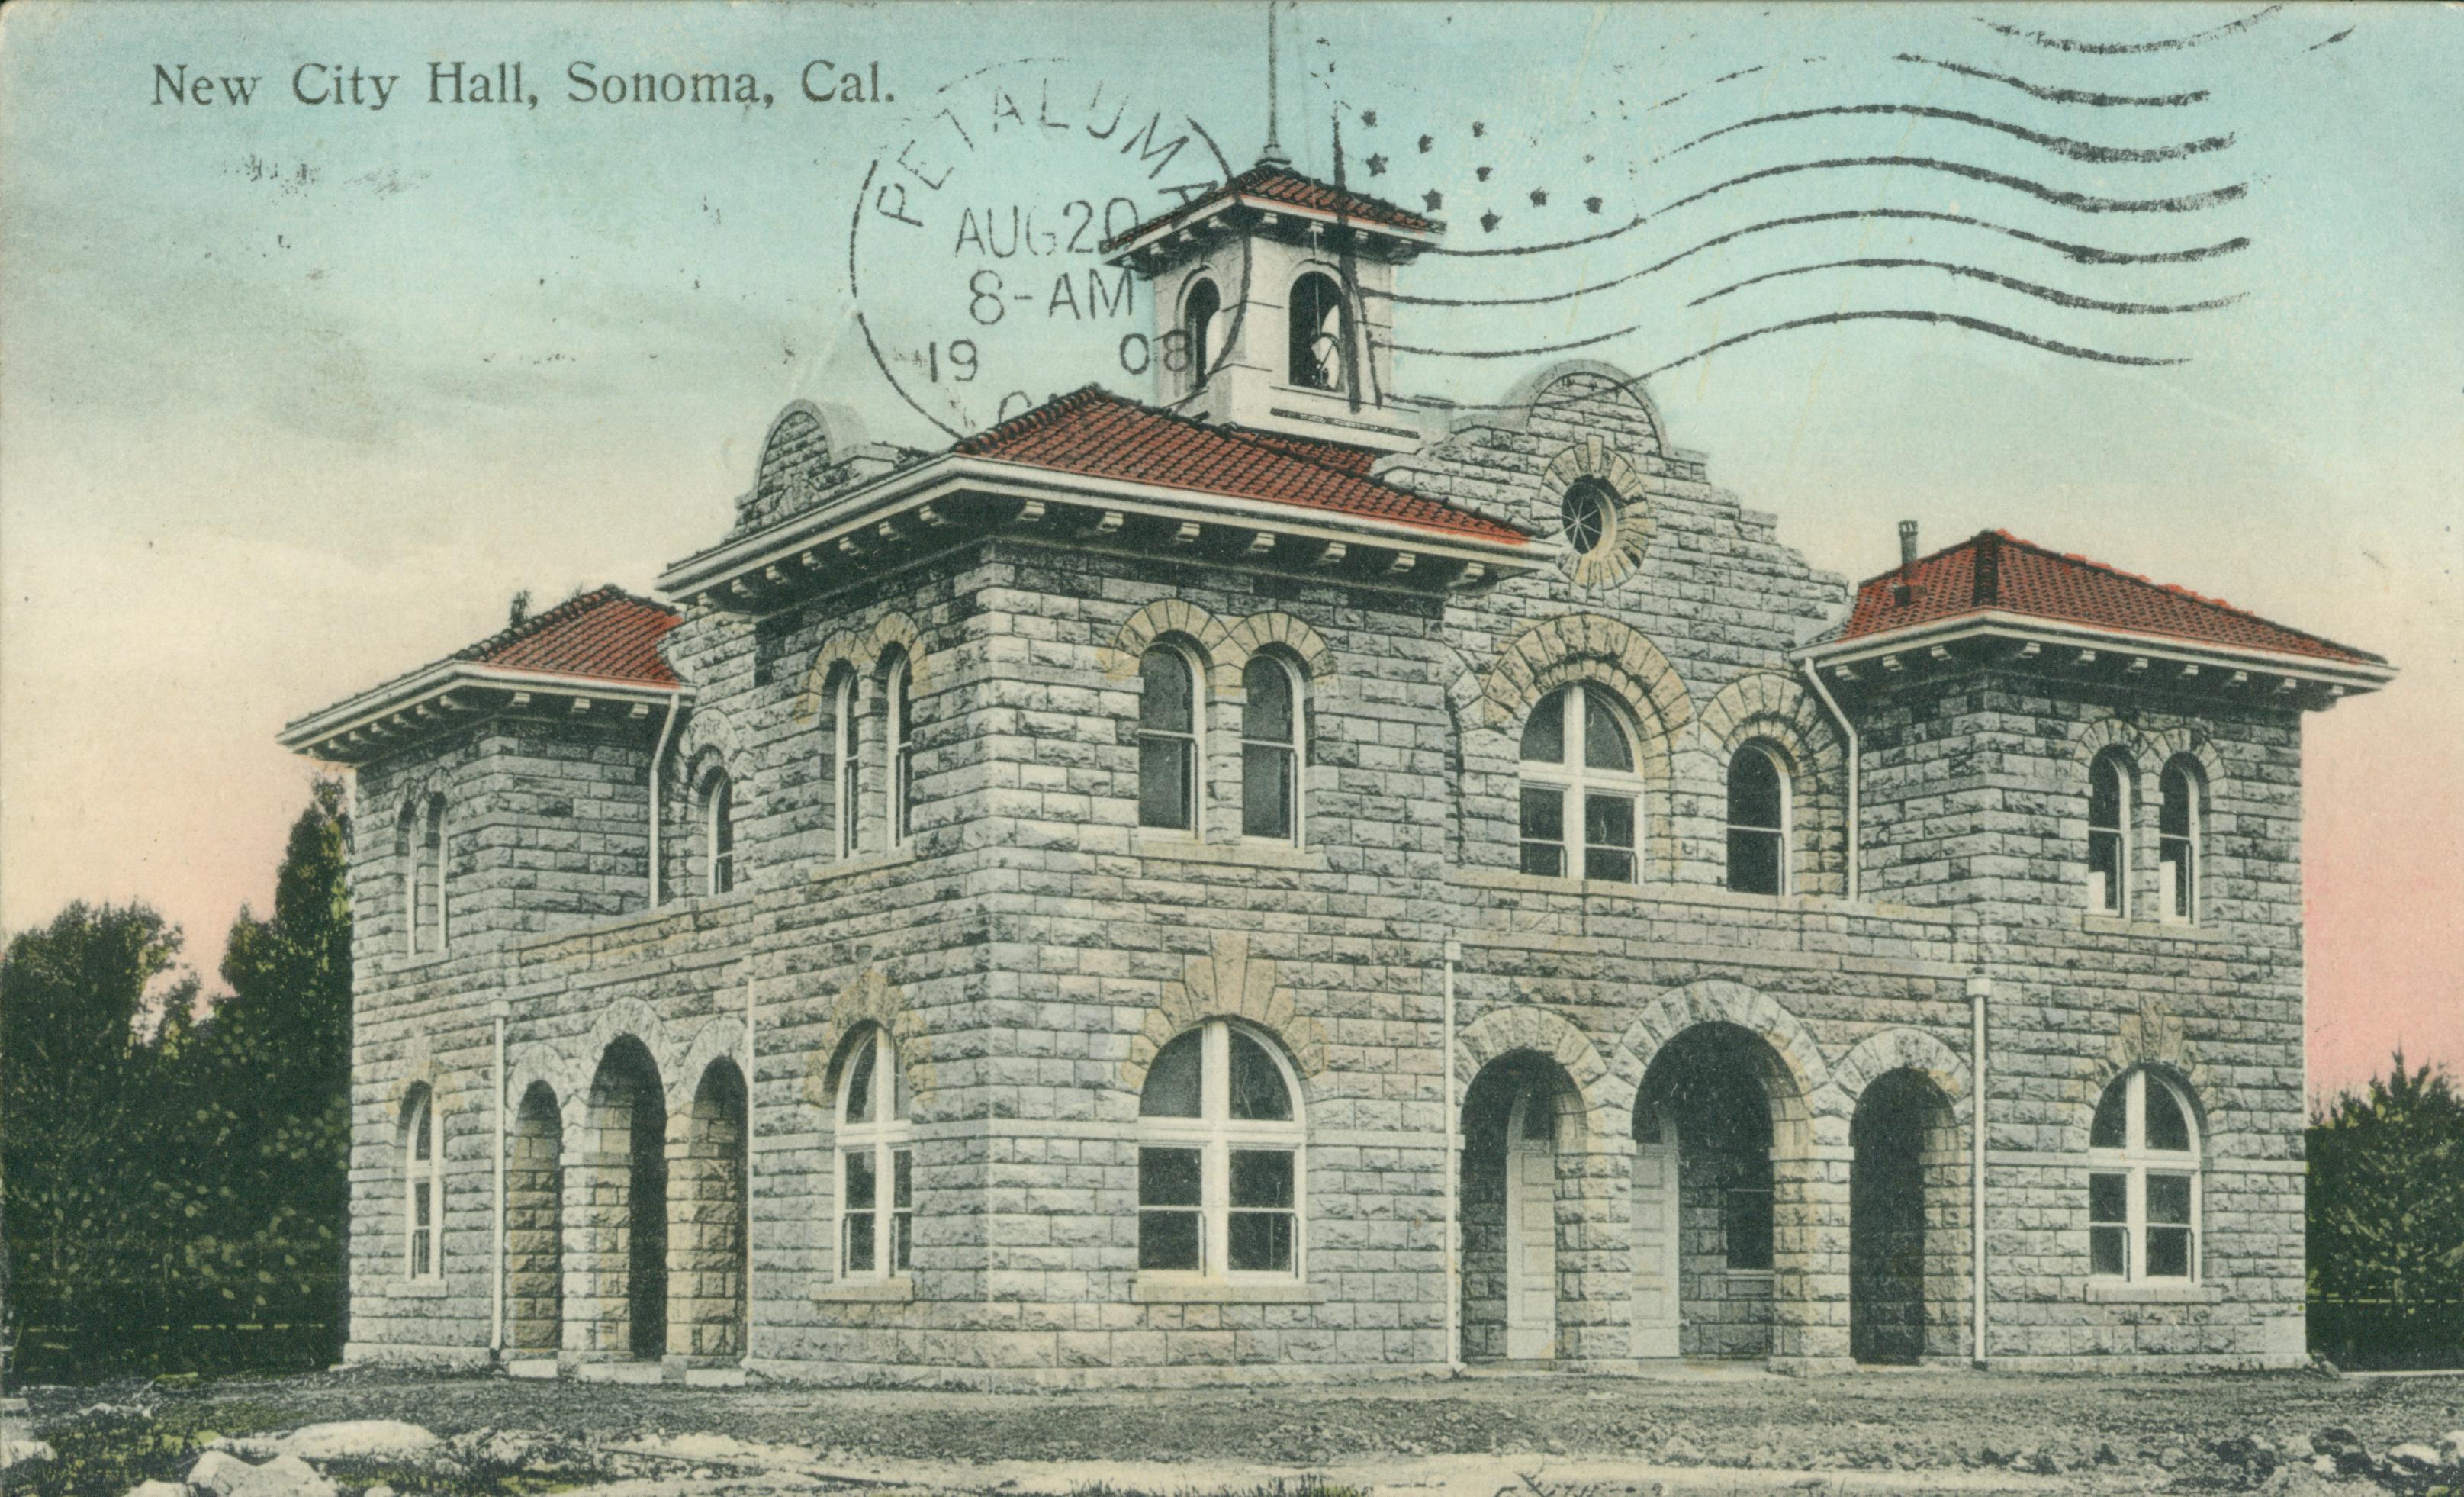 Shows a corner view of Sonoma's city hall